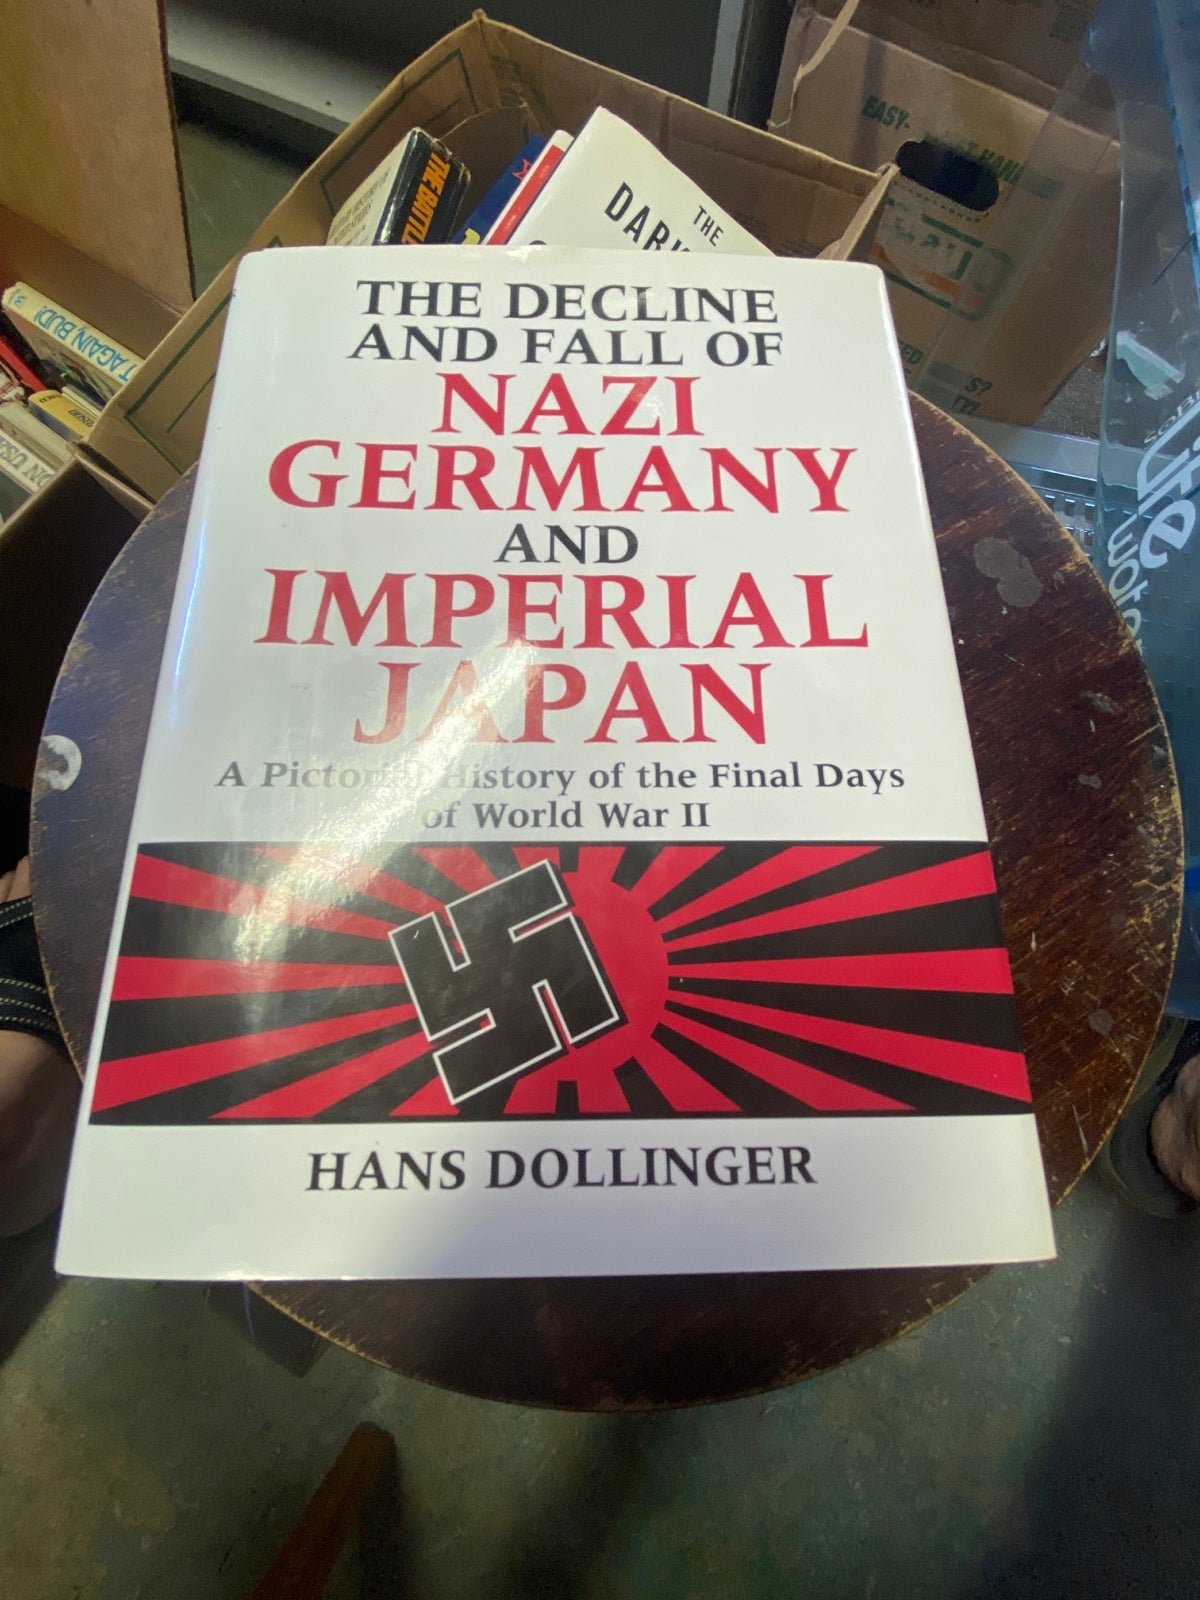 The decline and fall of nazi germany and imperial Japan